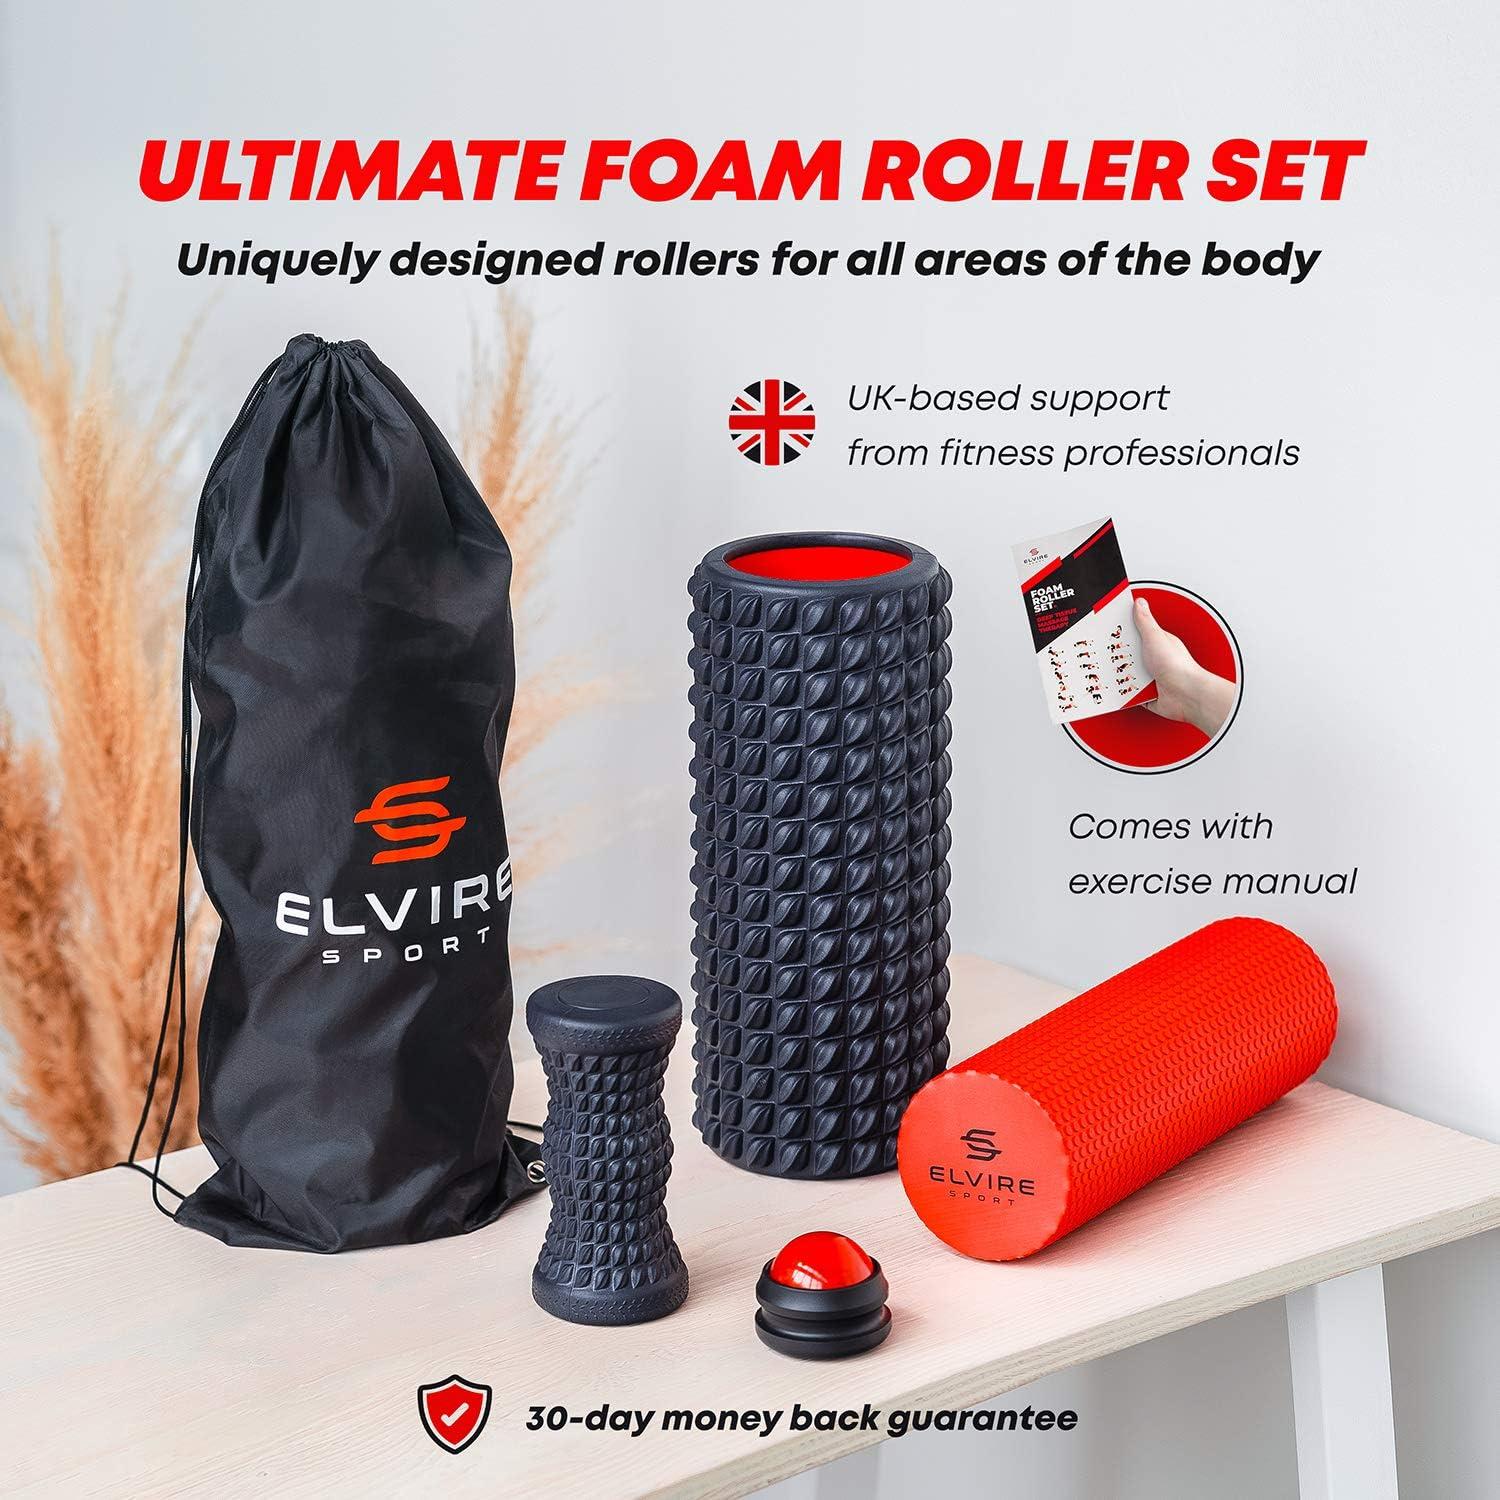 Foam Roller for Physical Therapy, Deep Tissue Muscle Roller Set - Includes:  Back Roller x2, Massage Roller, Massage Ball, Foot Roller - Foam Roller for  Back, Neck, Feet & Leg Roller